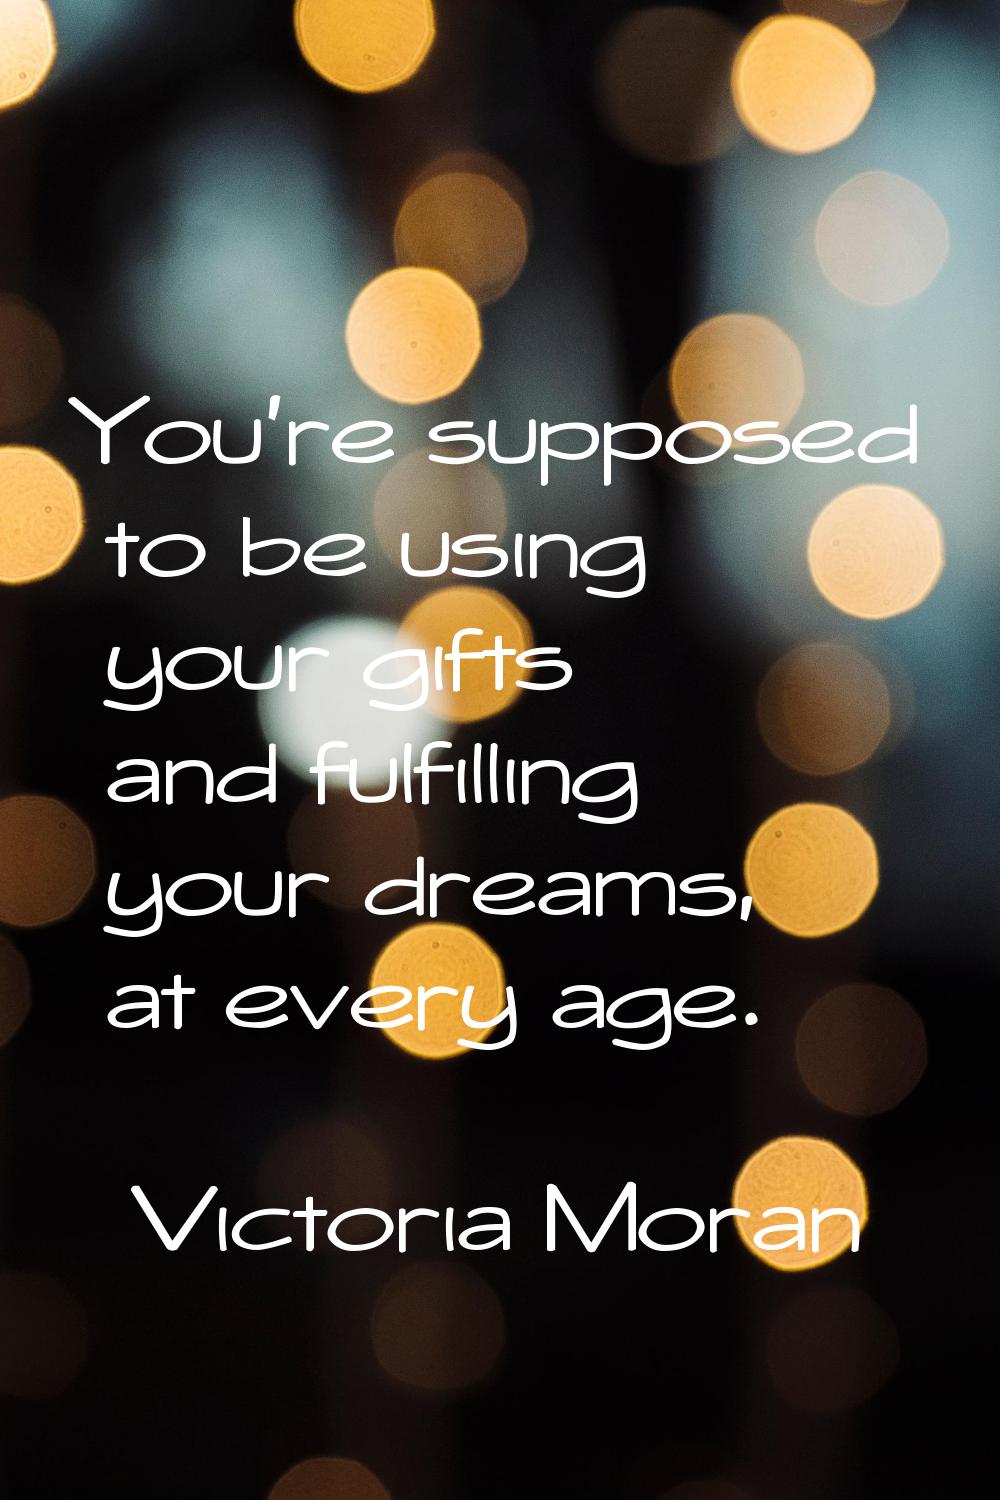 You're supposed to be using your gifts and fulfilling your dreams, at every age.